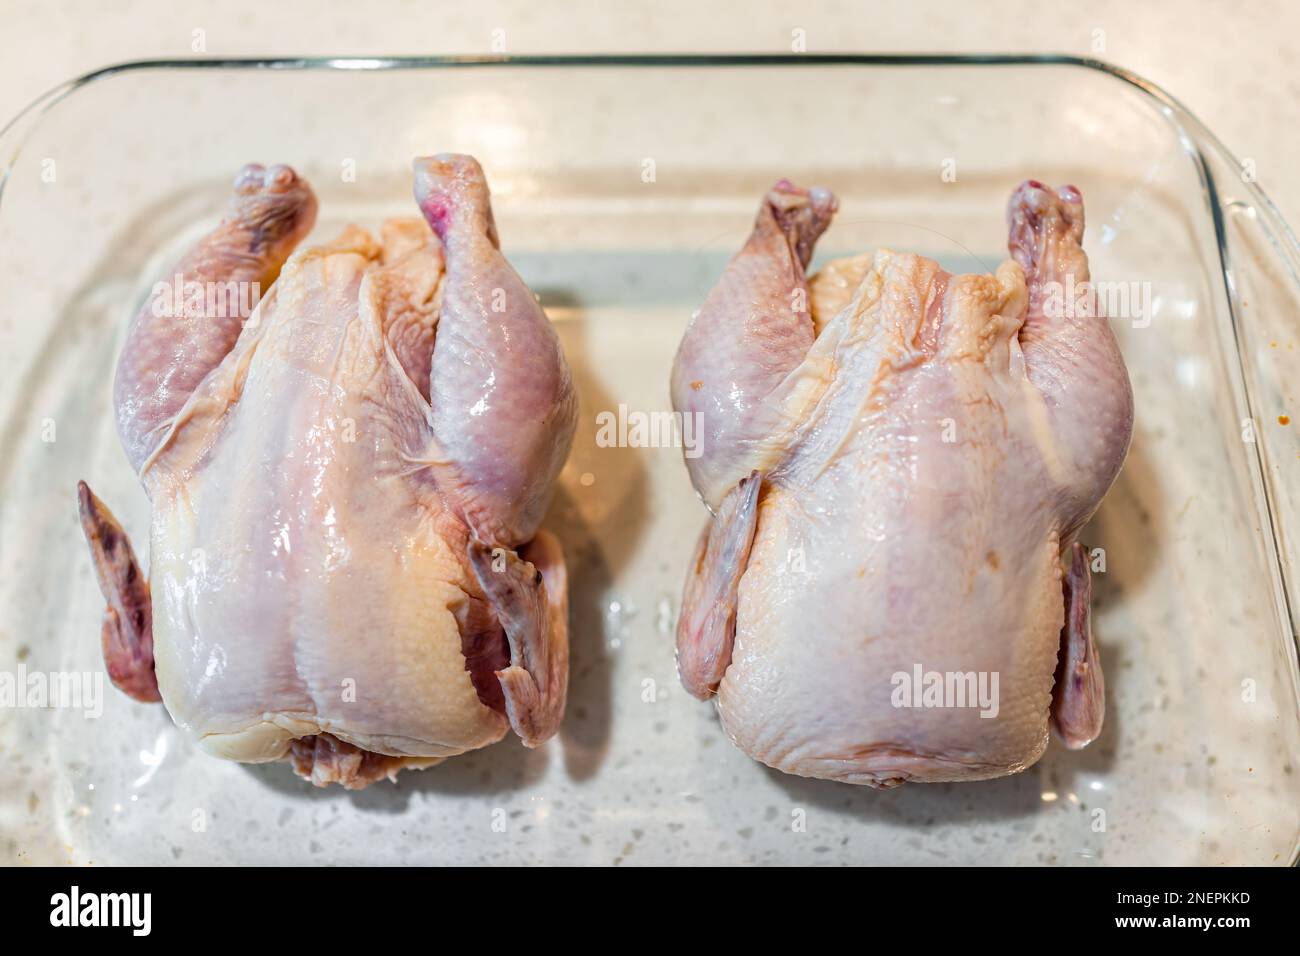 Closeup of two small whole cornish hen chickens for roasting as raw pink meat in glass baking pan dish tray above view Stock Photo